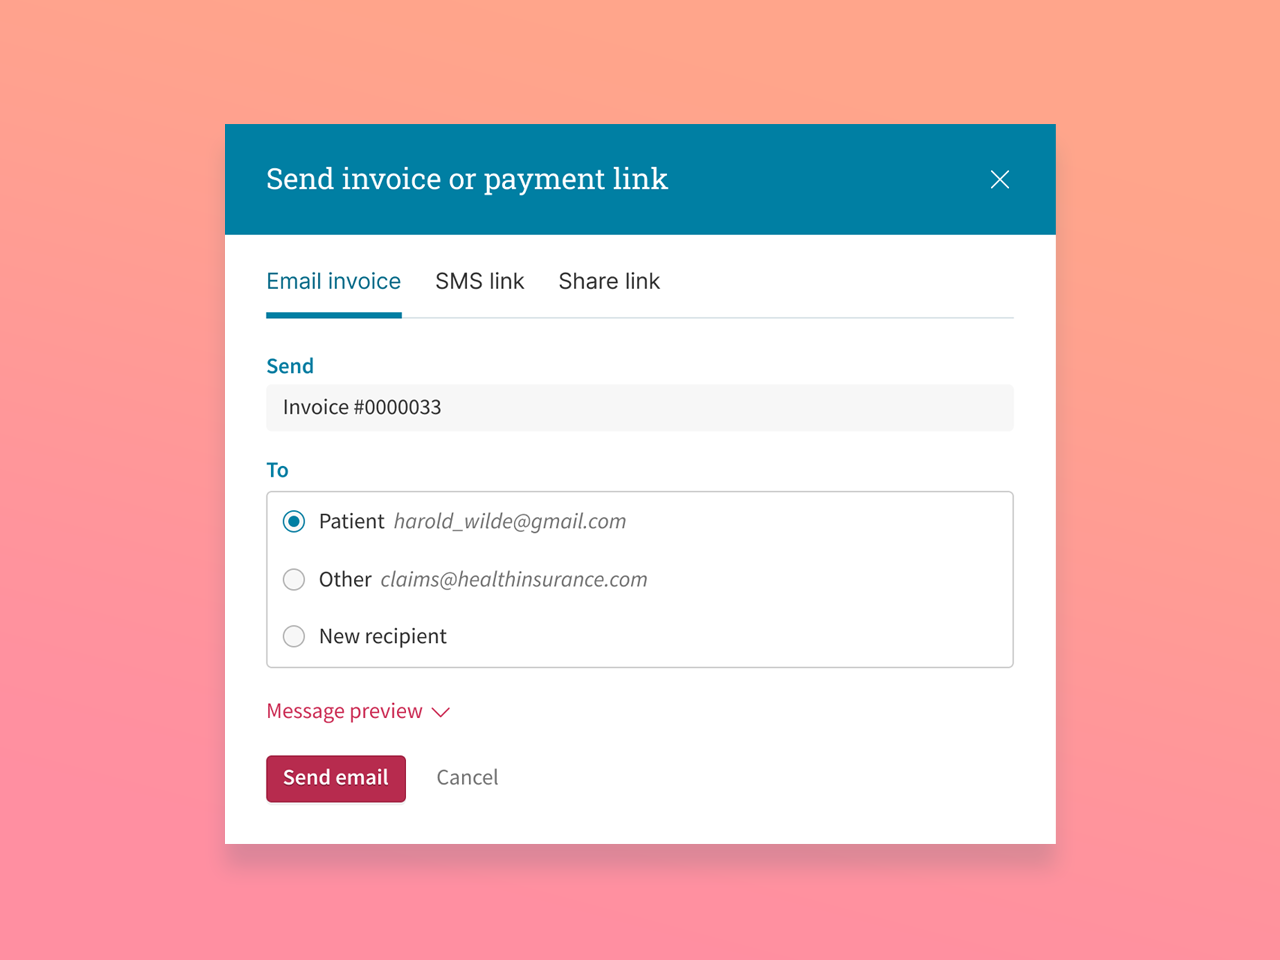 A screenshot of the Send invoice or payment link options